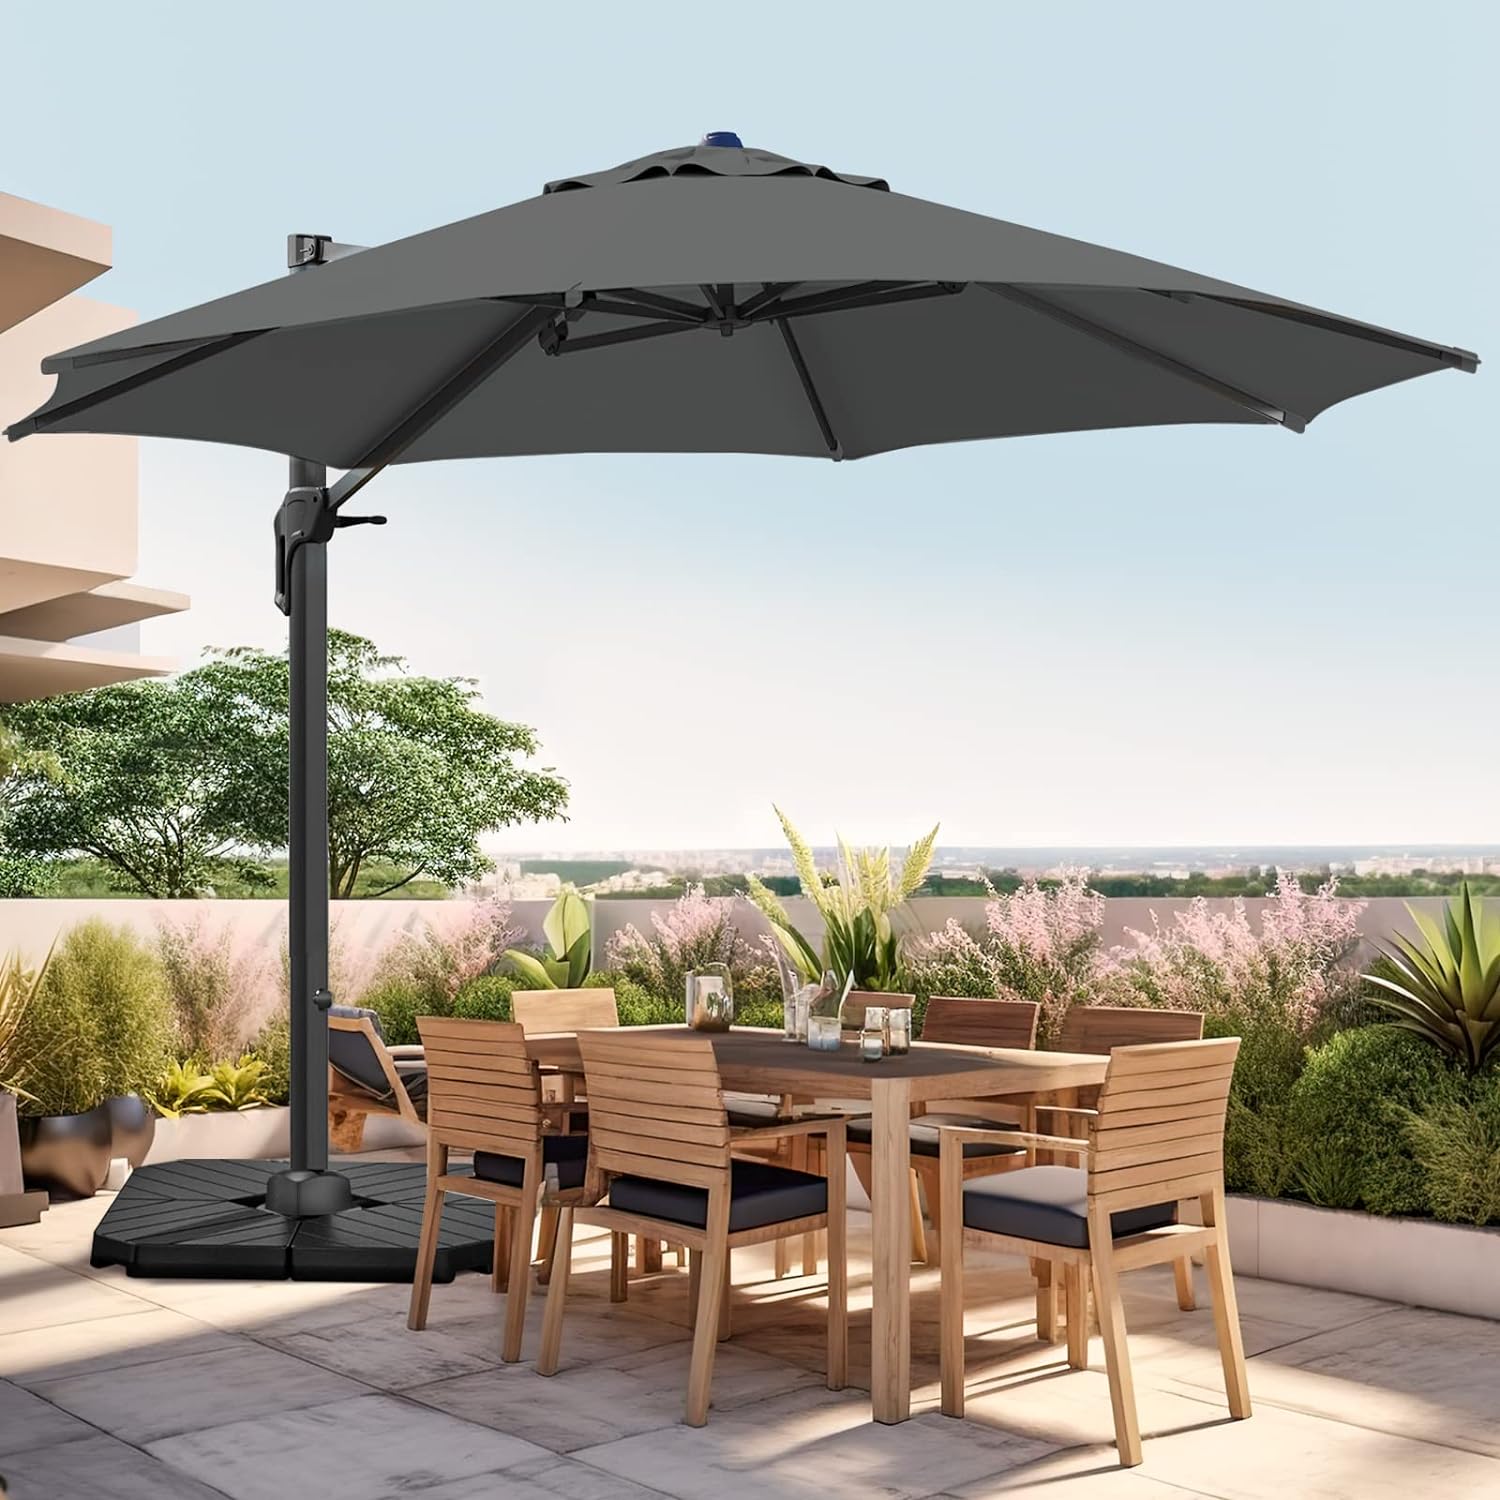 wikiwiki 11 FT Cantilever Patio Umbrellas Outdoor Offset Umbrella w/ 36 Month Fade Resistance Recycled Fabric, 6-Level 360Rotation Aluminum Pole for Deck Pool Garden, Grey